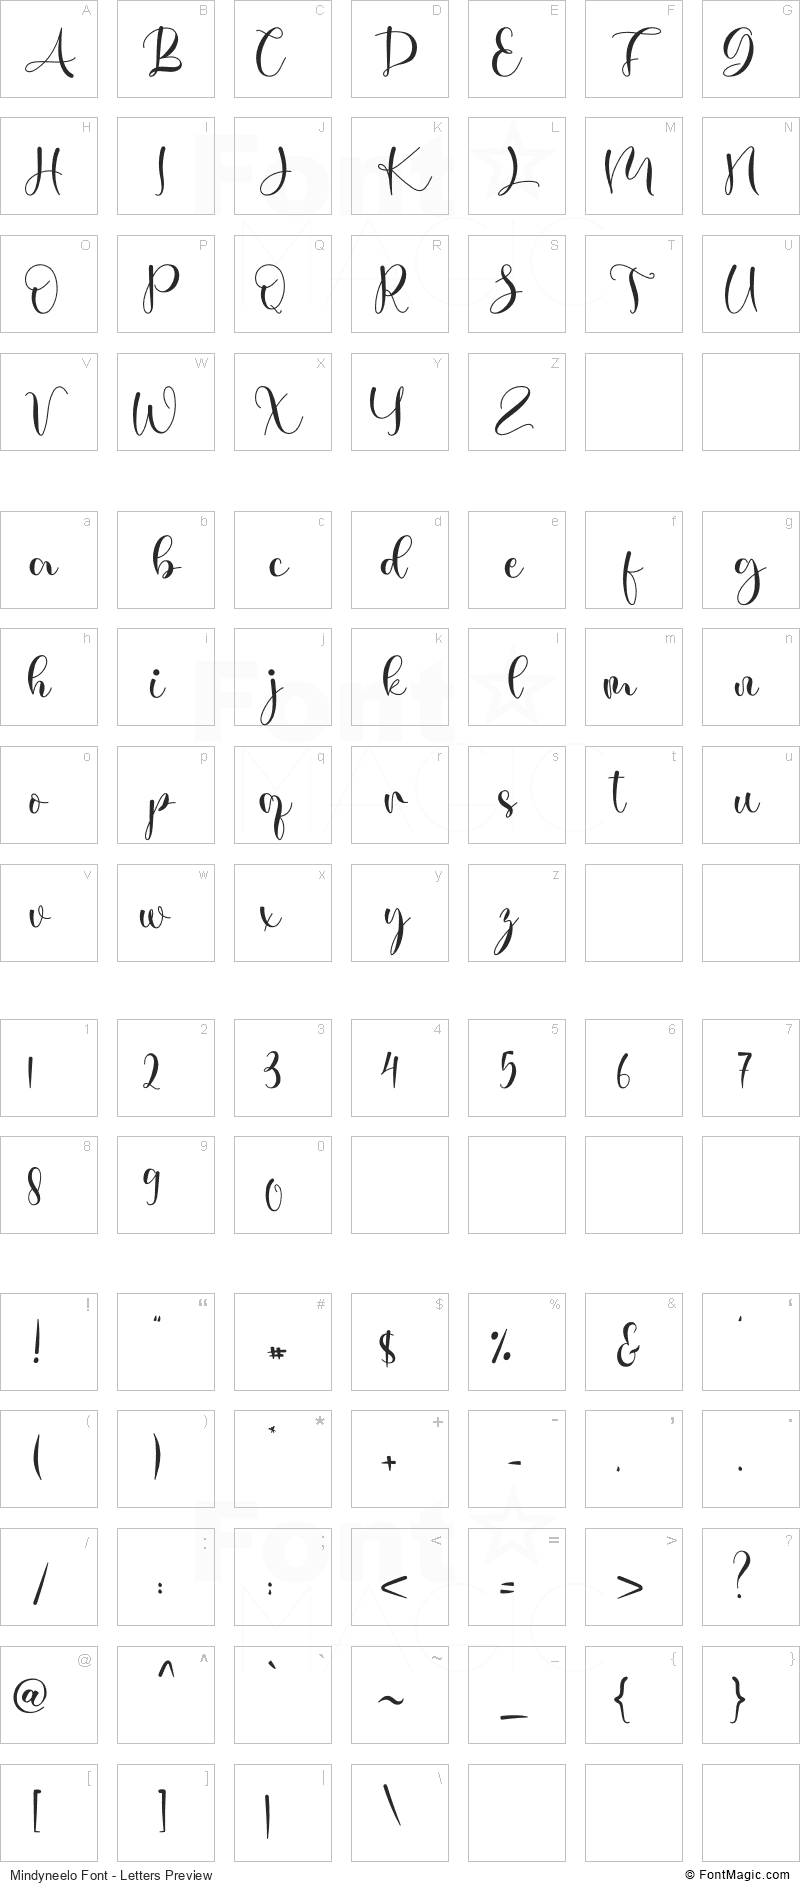 Mindyneelo Font - All Latters Preview Chart